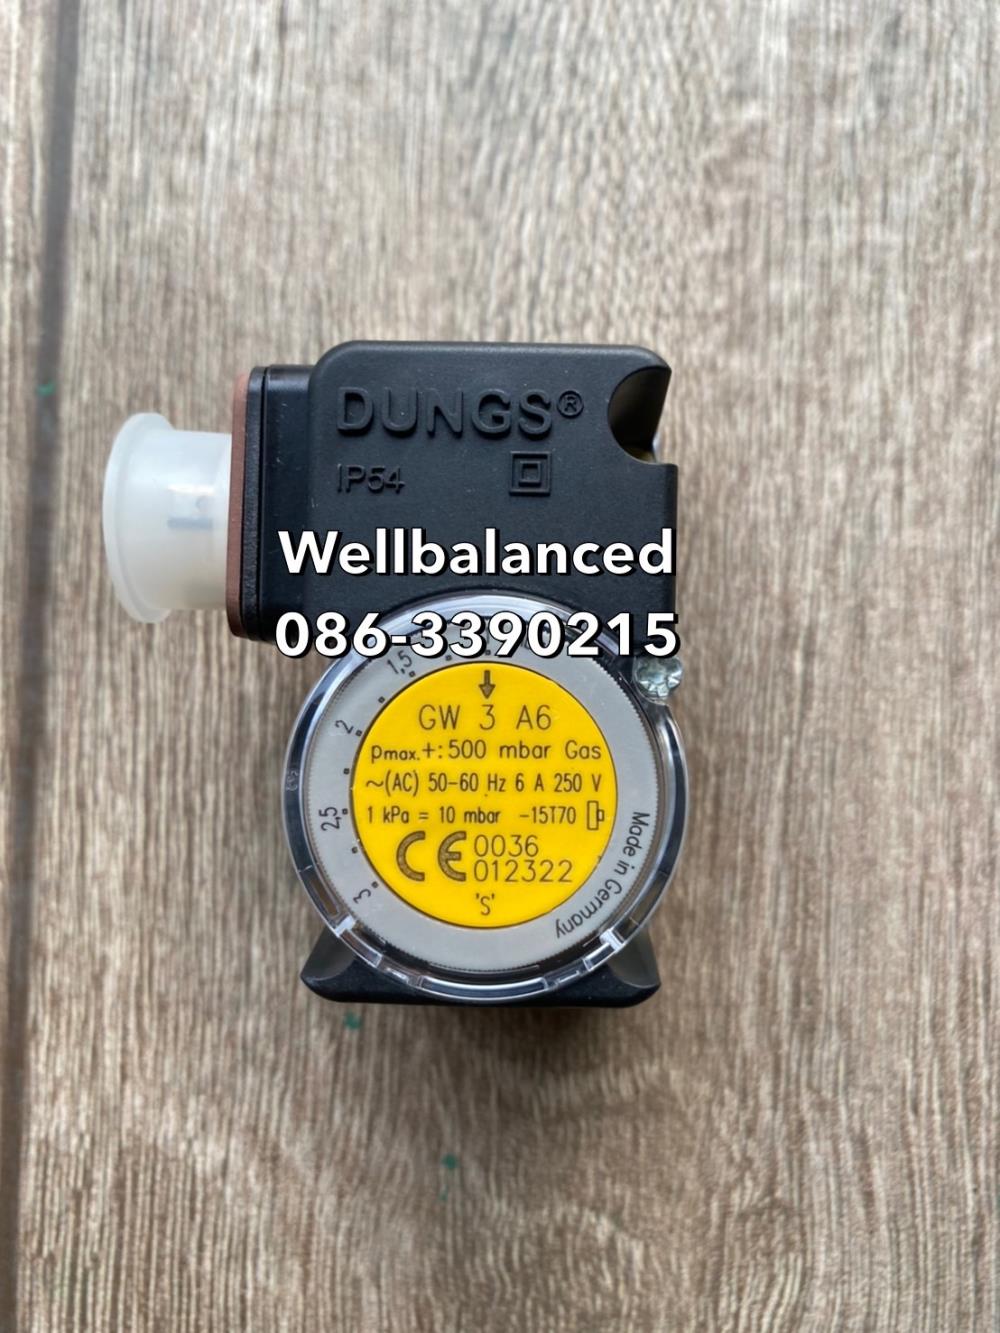 " DUNGS " Pressure Switch Model : GW 3 A6," DUNGS " Pressure Switch Model : GW 3 A6," DUNGS " Pressure Switch Model : GW 3 A6,Instruments and Controls/Switches